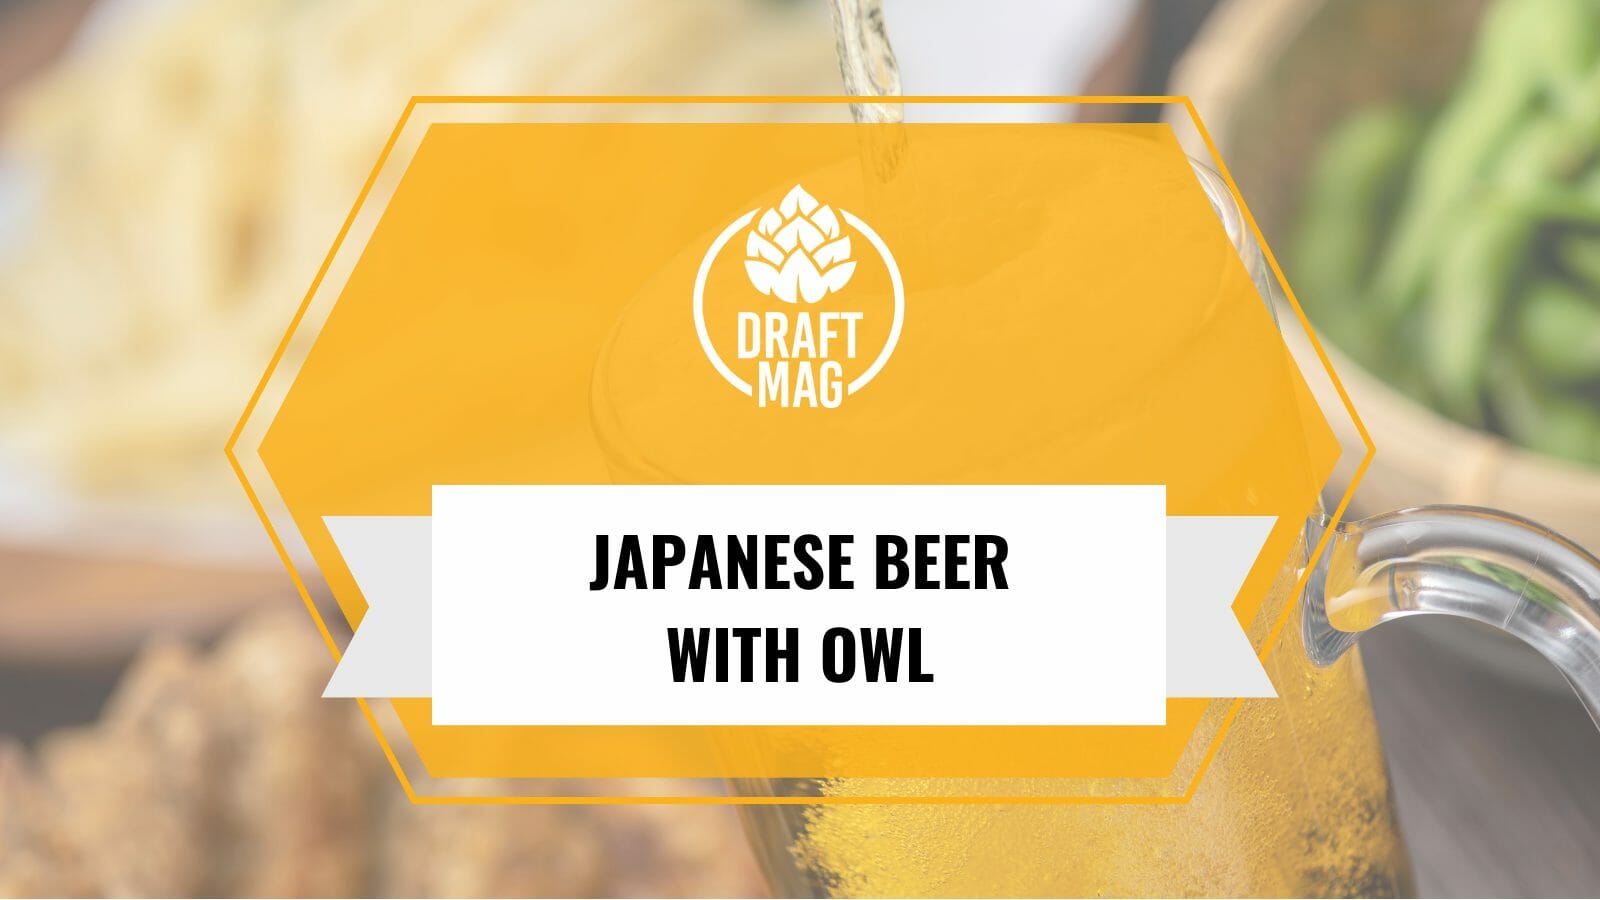 Japanese beer with owl